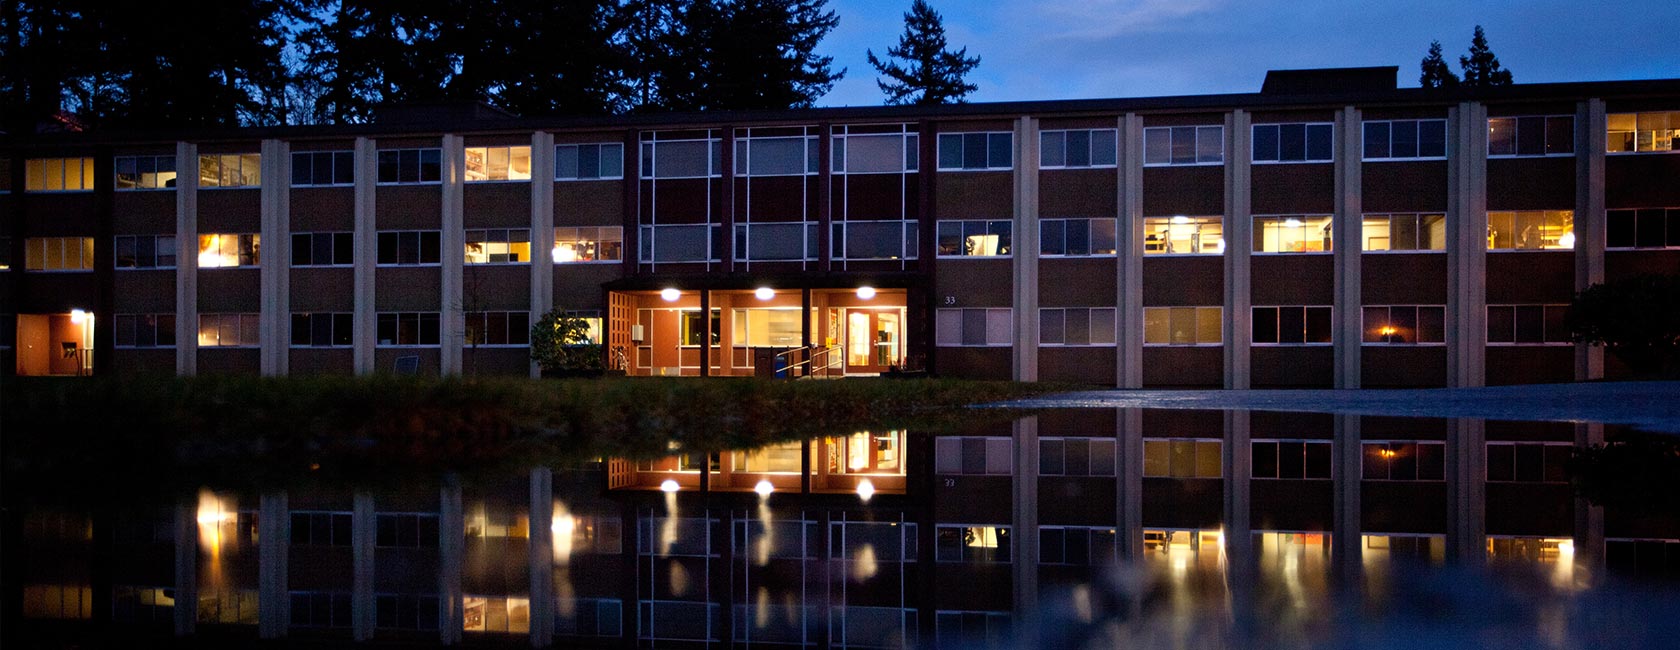 Opened in 1965, the sun will soon set on PLU's Foss Hall. (Photo by John Froschauer/PLU)